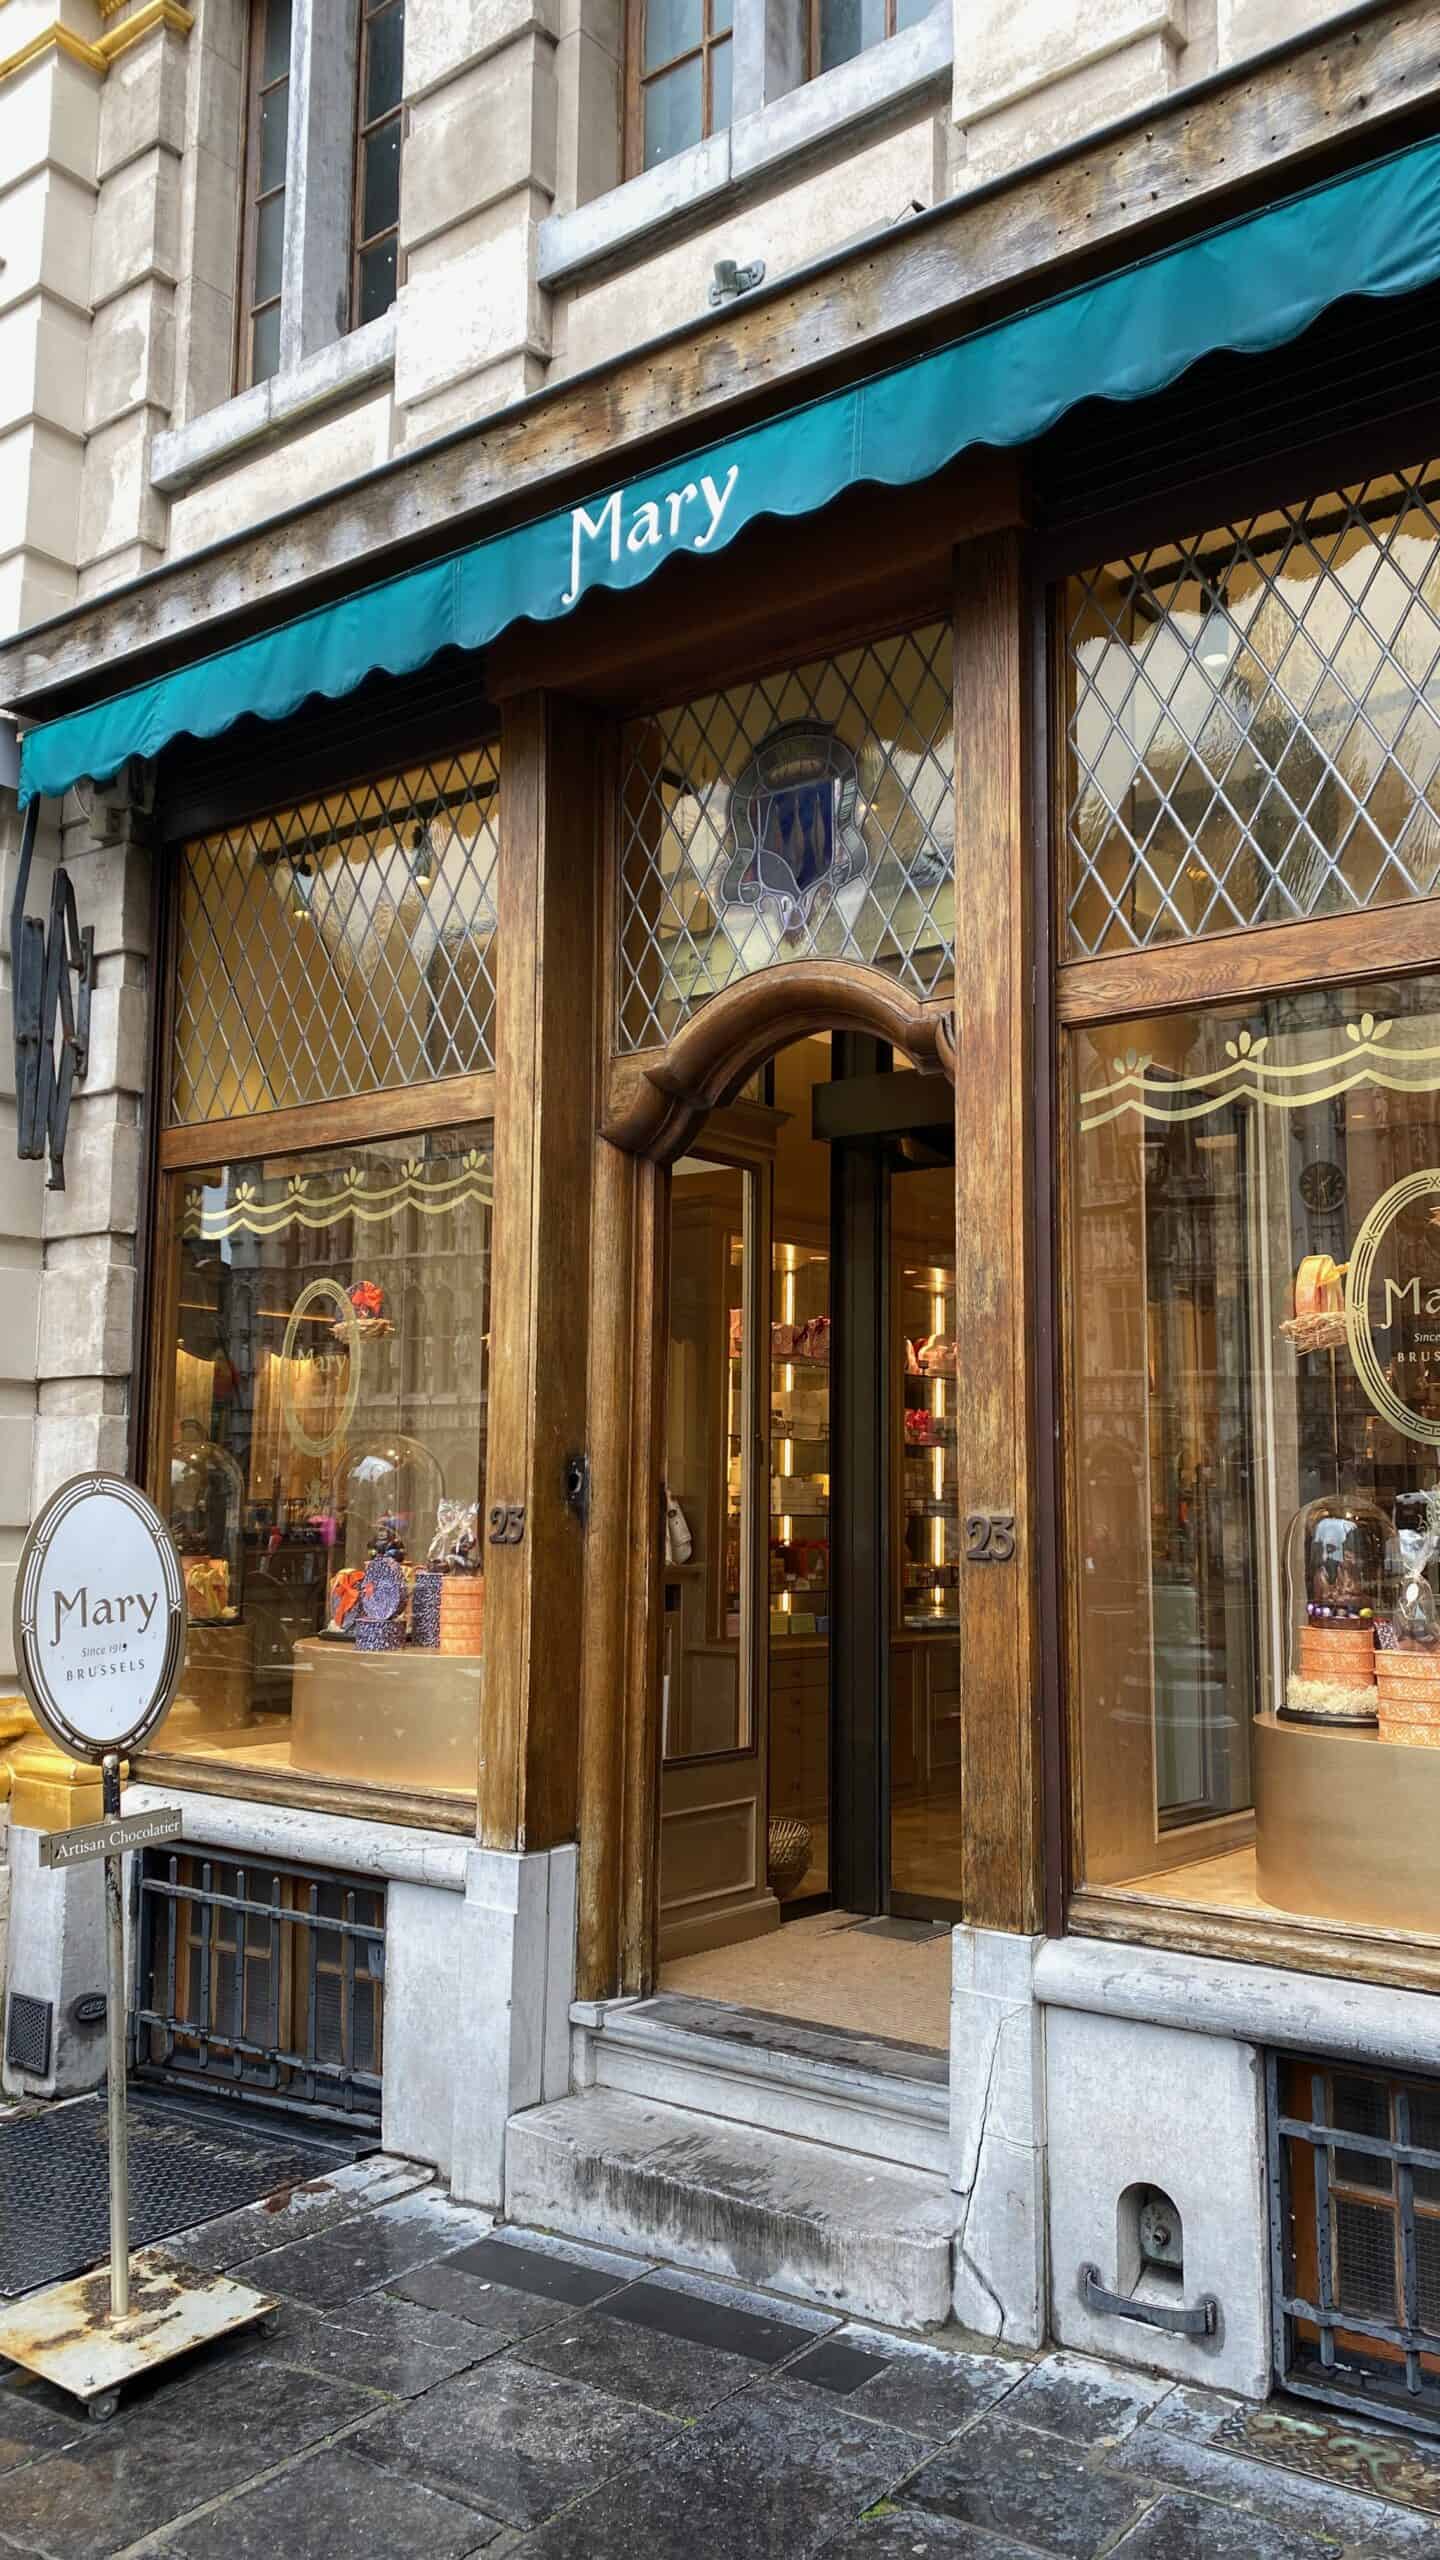 Marys storefront - one of the best chocolates in Brussels